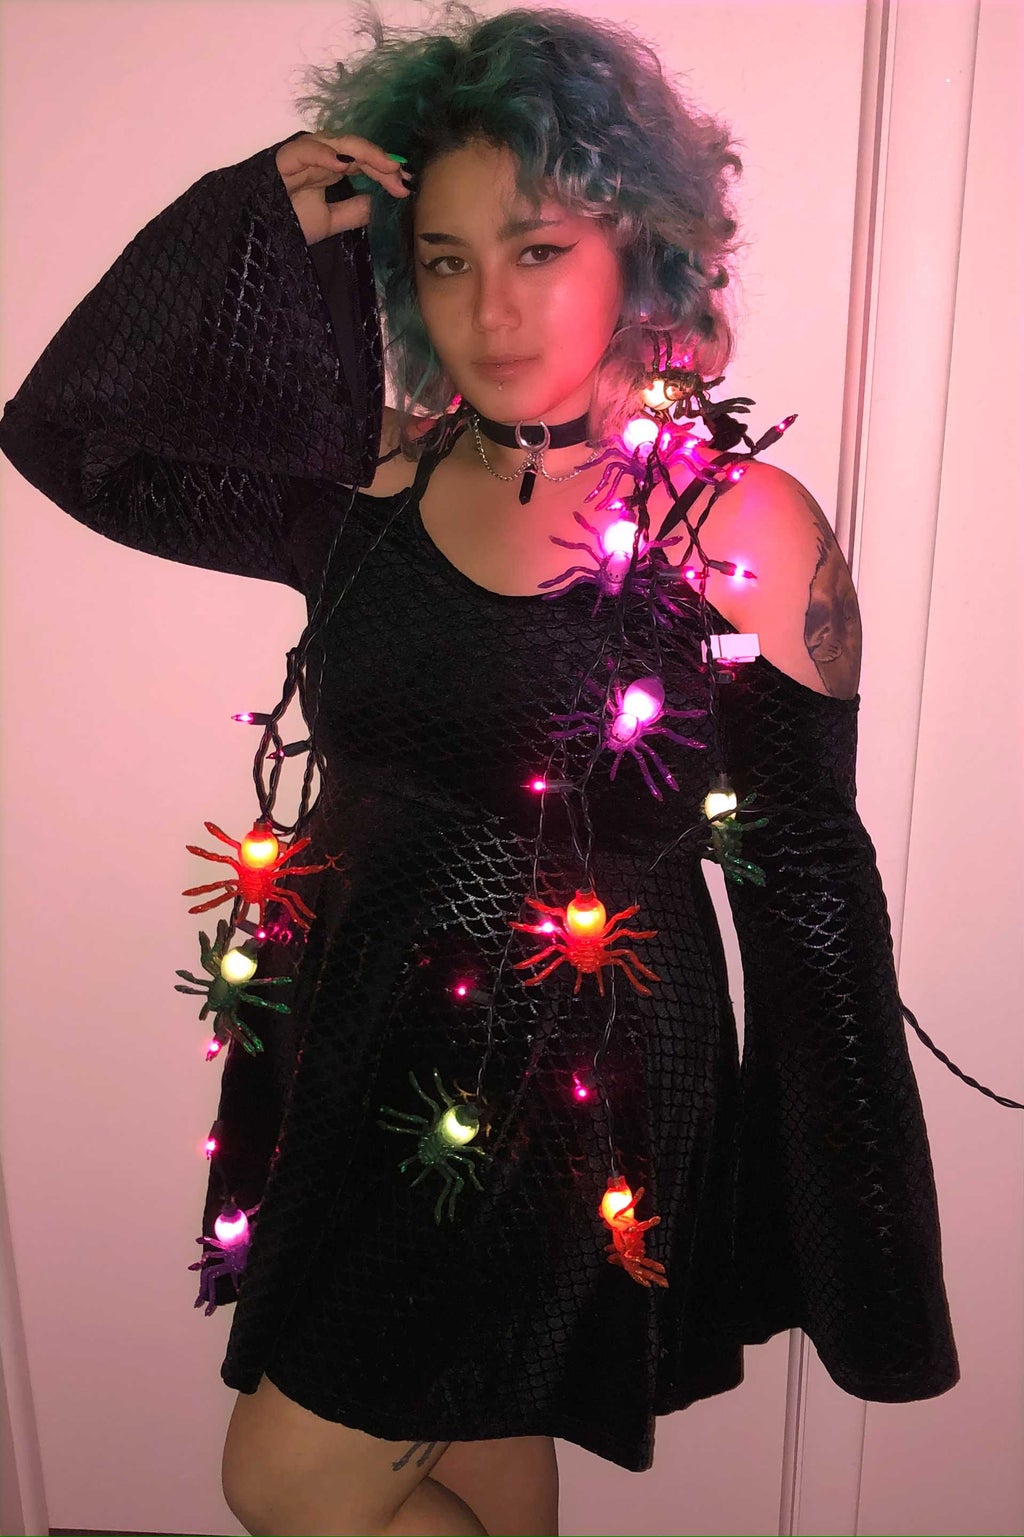 Picture I took of myself in a black dress with spider lights